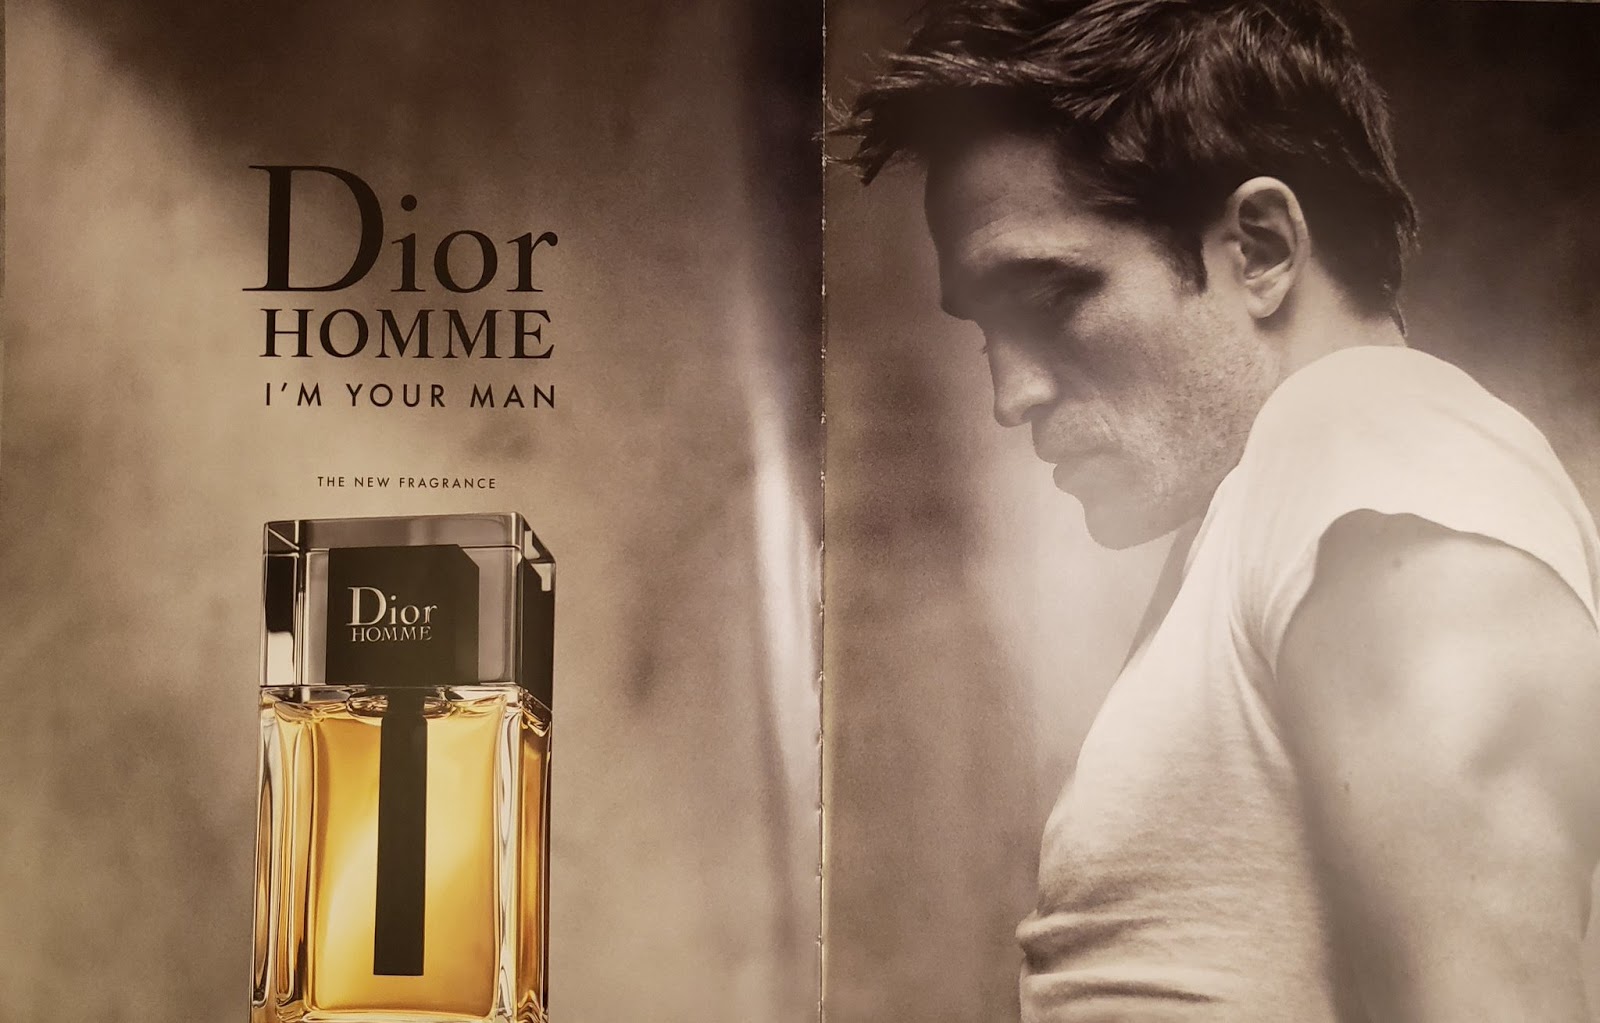 Homme 2020. Dior the one мужские. Dior homme 2020. I’M your man Dior.